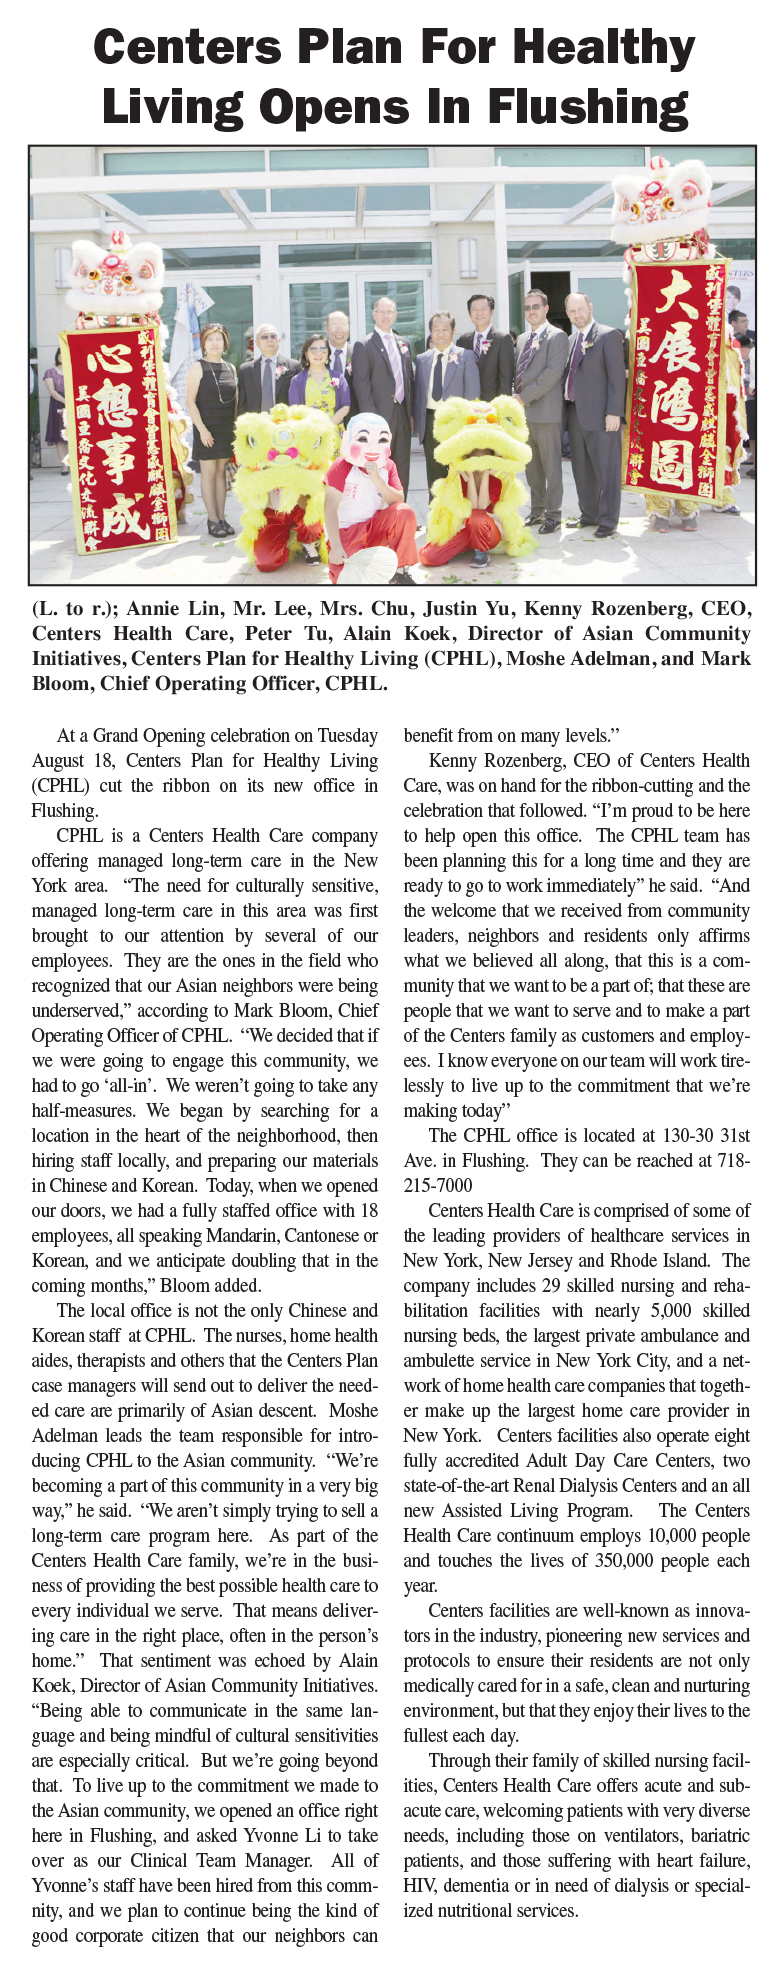 Queens Gazette acknowledges Flushing Grand Opening August 26, 2015